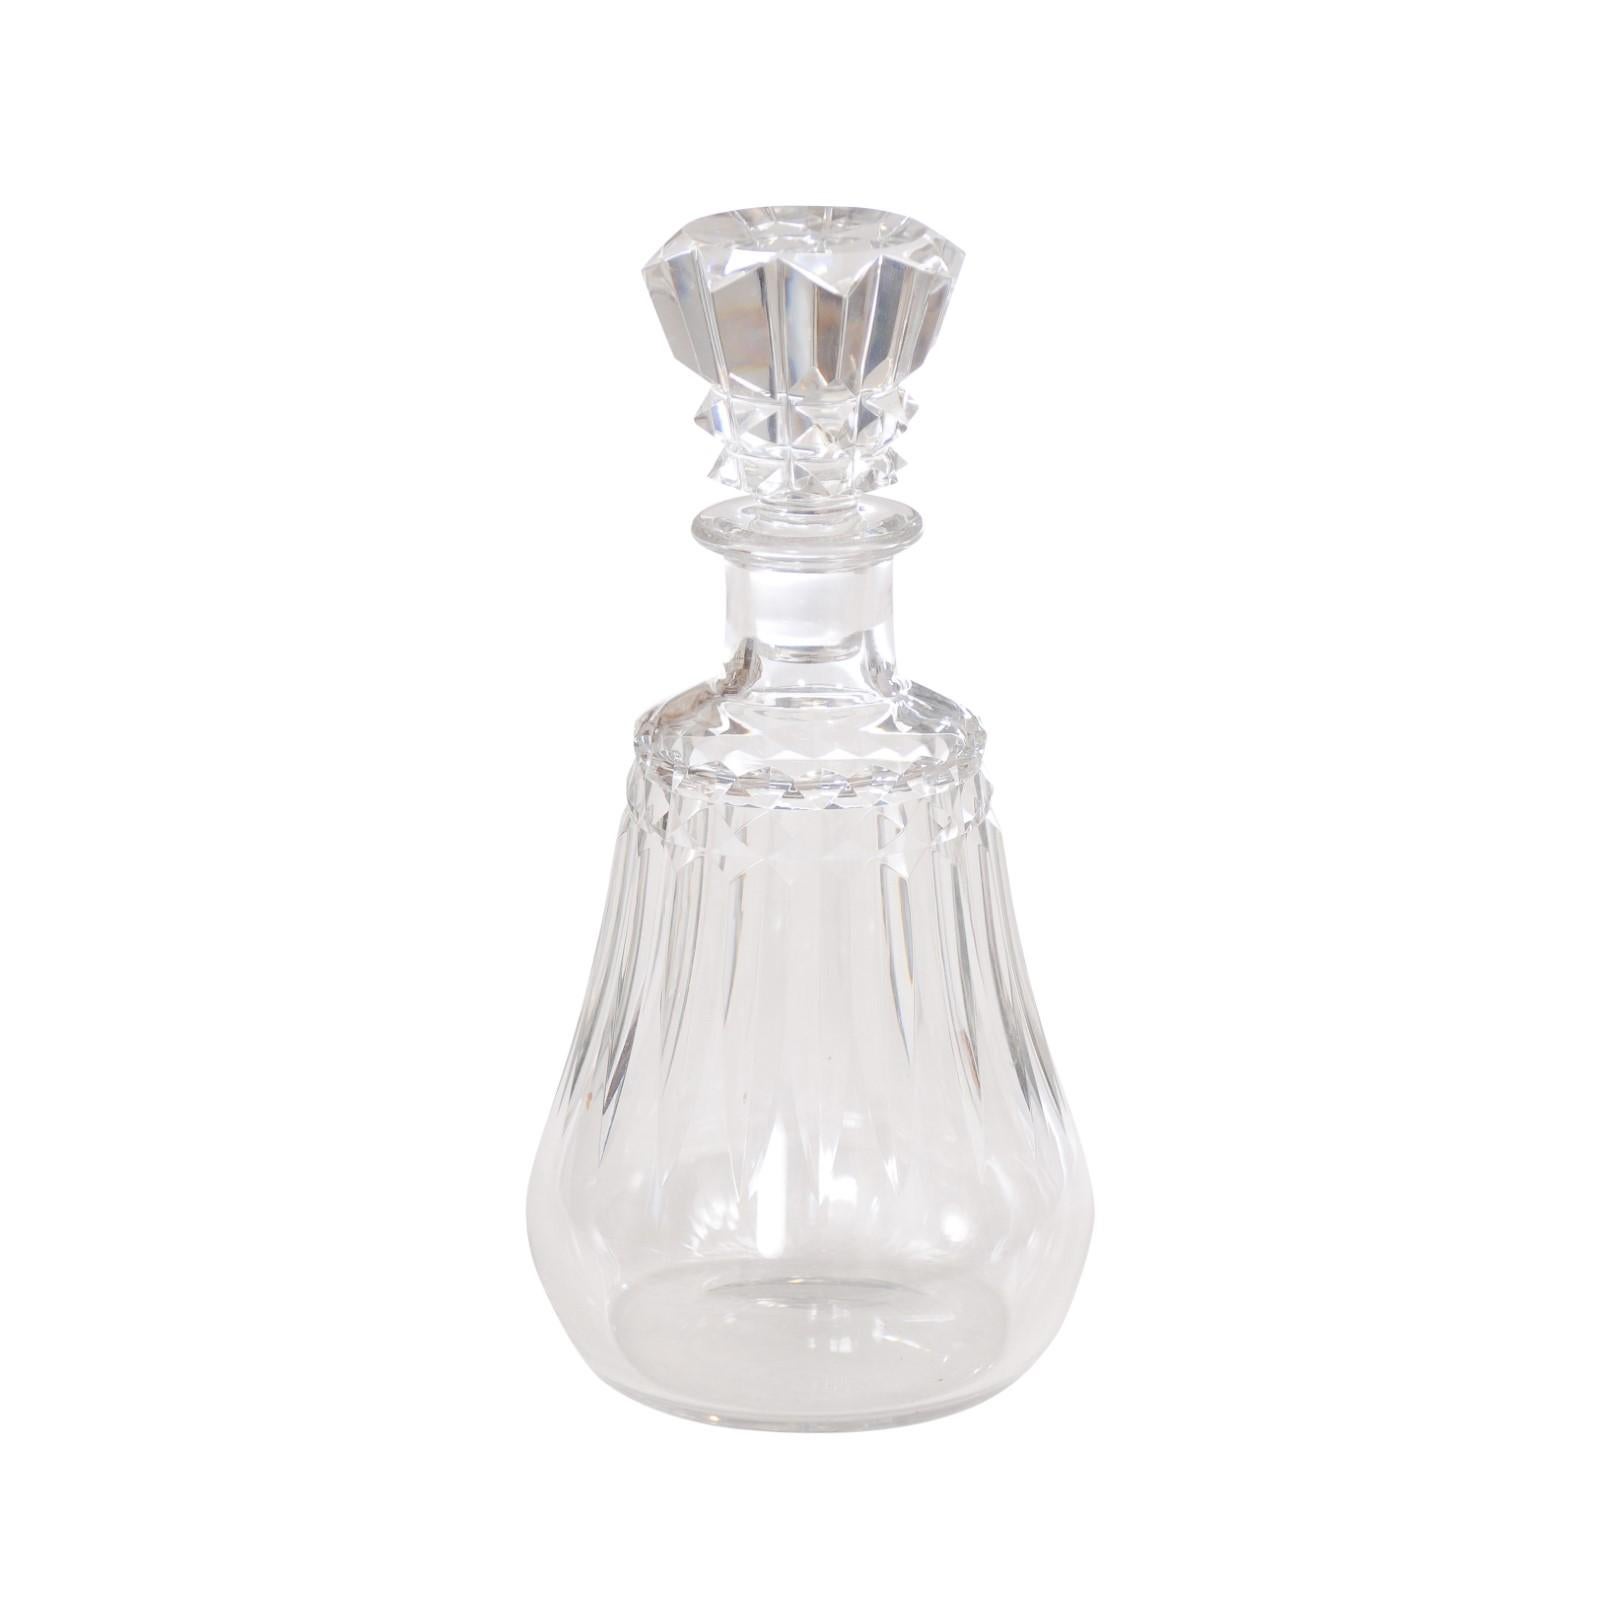 A French Baccarat crystal decanter circa 1940 with cutaway motifs and pear shaped body. Elevate your dining experience with this French Baccarat crystal decanter from the circa 1940s. Meticulously crafted, this decanter showcases the timeless beauty